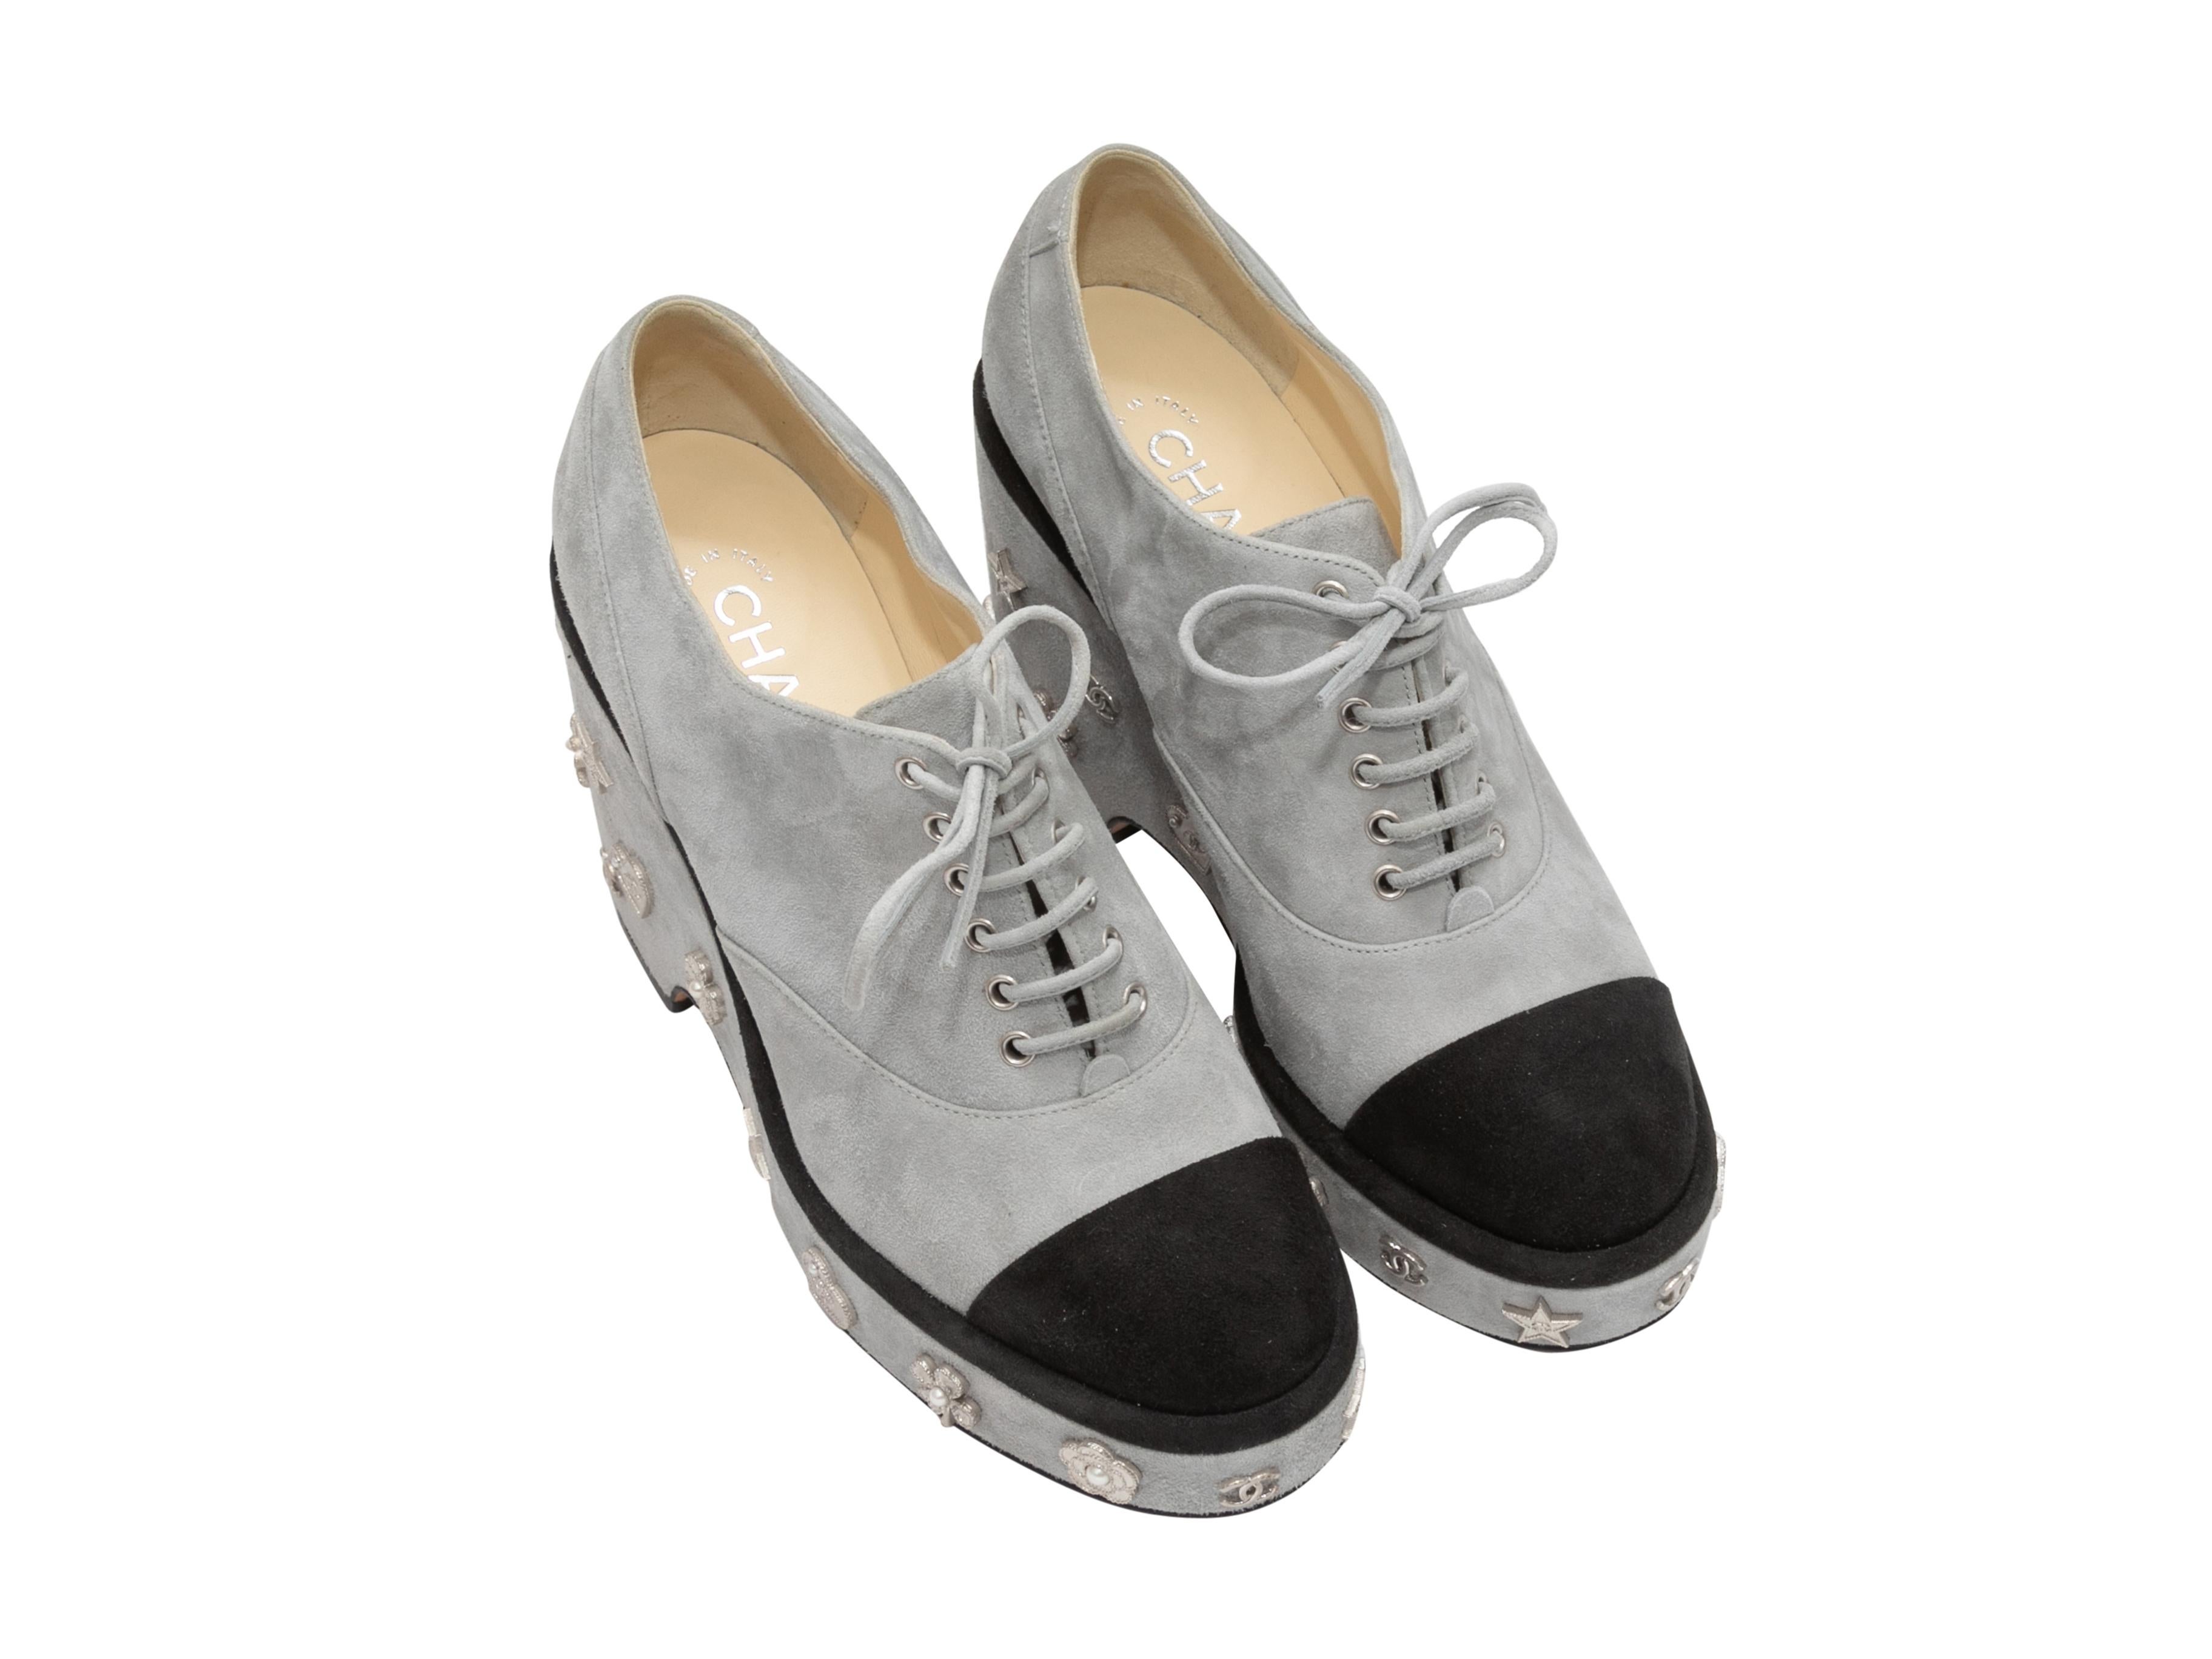  Grey and black suede cap-toe platform oxfords by Chanel. Silver-tone metal adornments at heels. Lace-up tie closures at tops. 2.5